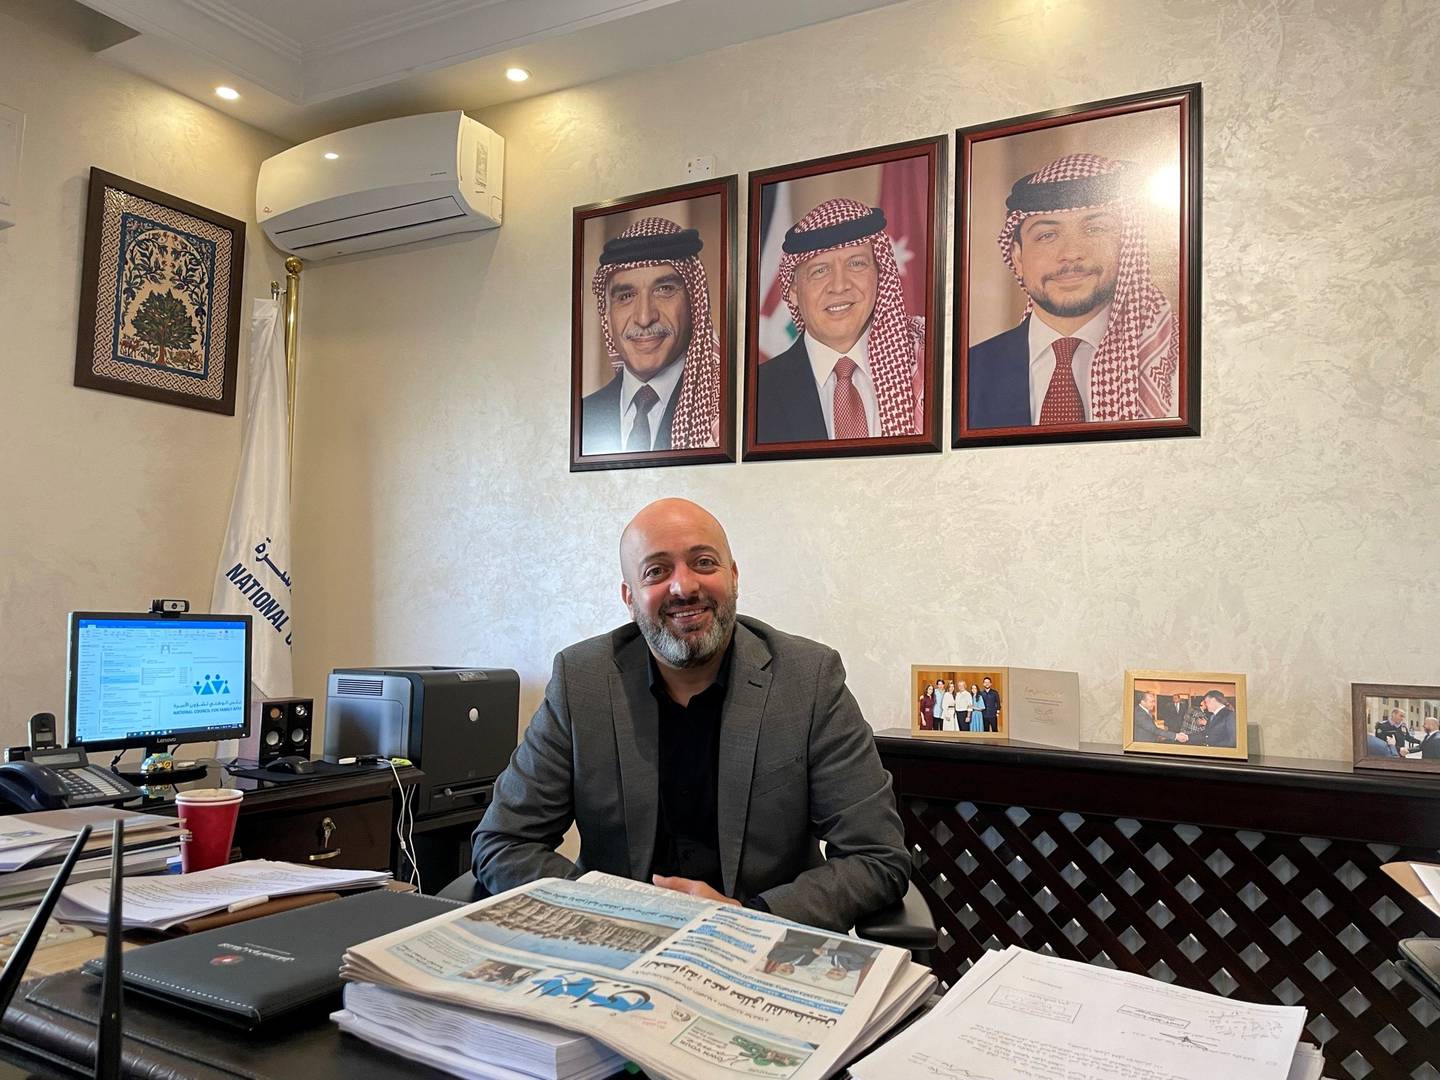 Mohammed Mogdadi, head of the National Council for Family Affairs, which is supported by Jordan’s Queen Rania, speaks to 'The National' at his office in Amman. Photo: Khaled Yacoub Oweis / The National